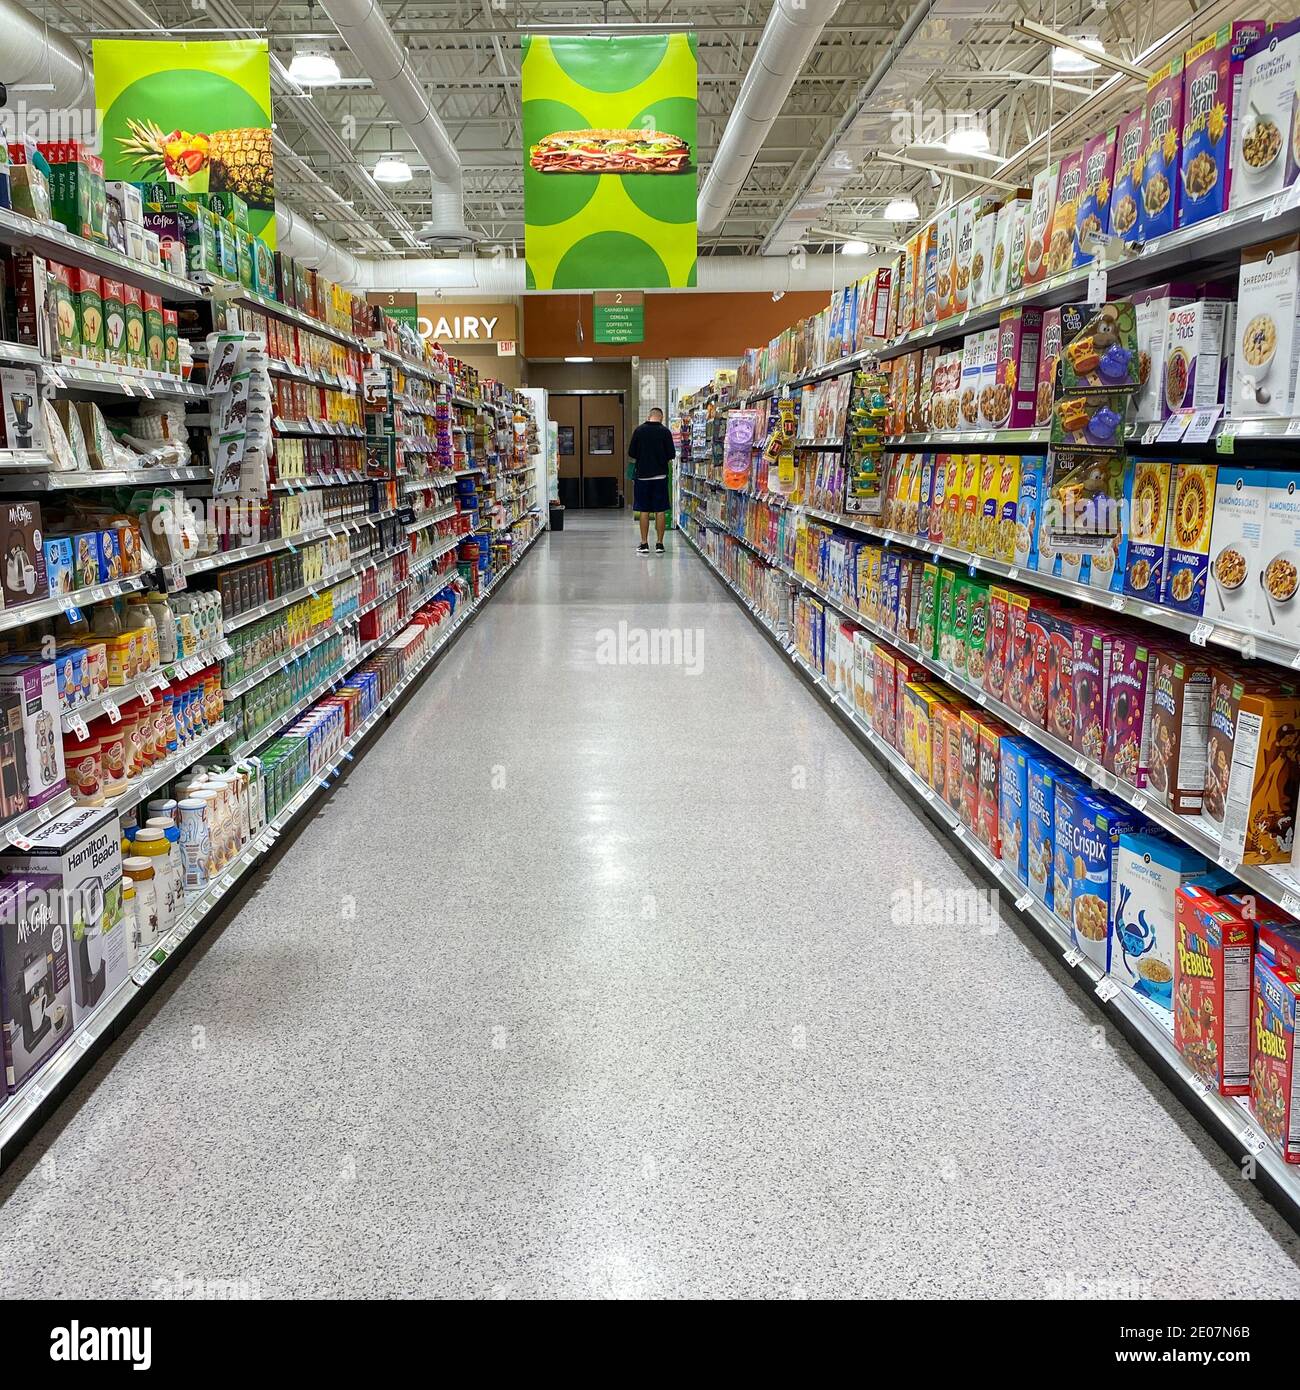 Orlando, FL USA - February 26, 2020:  The cereal, coffee and tea aisle at a Publix grocery store in Orlando, Florida. Stock Photo